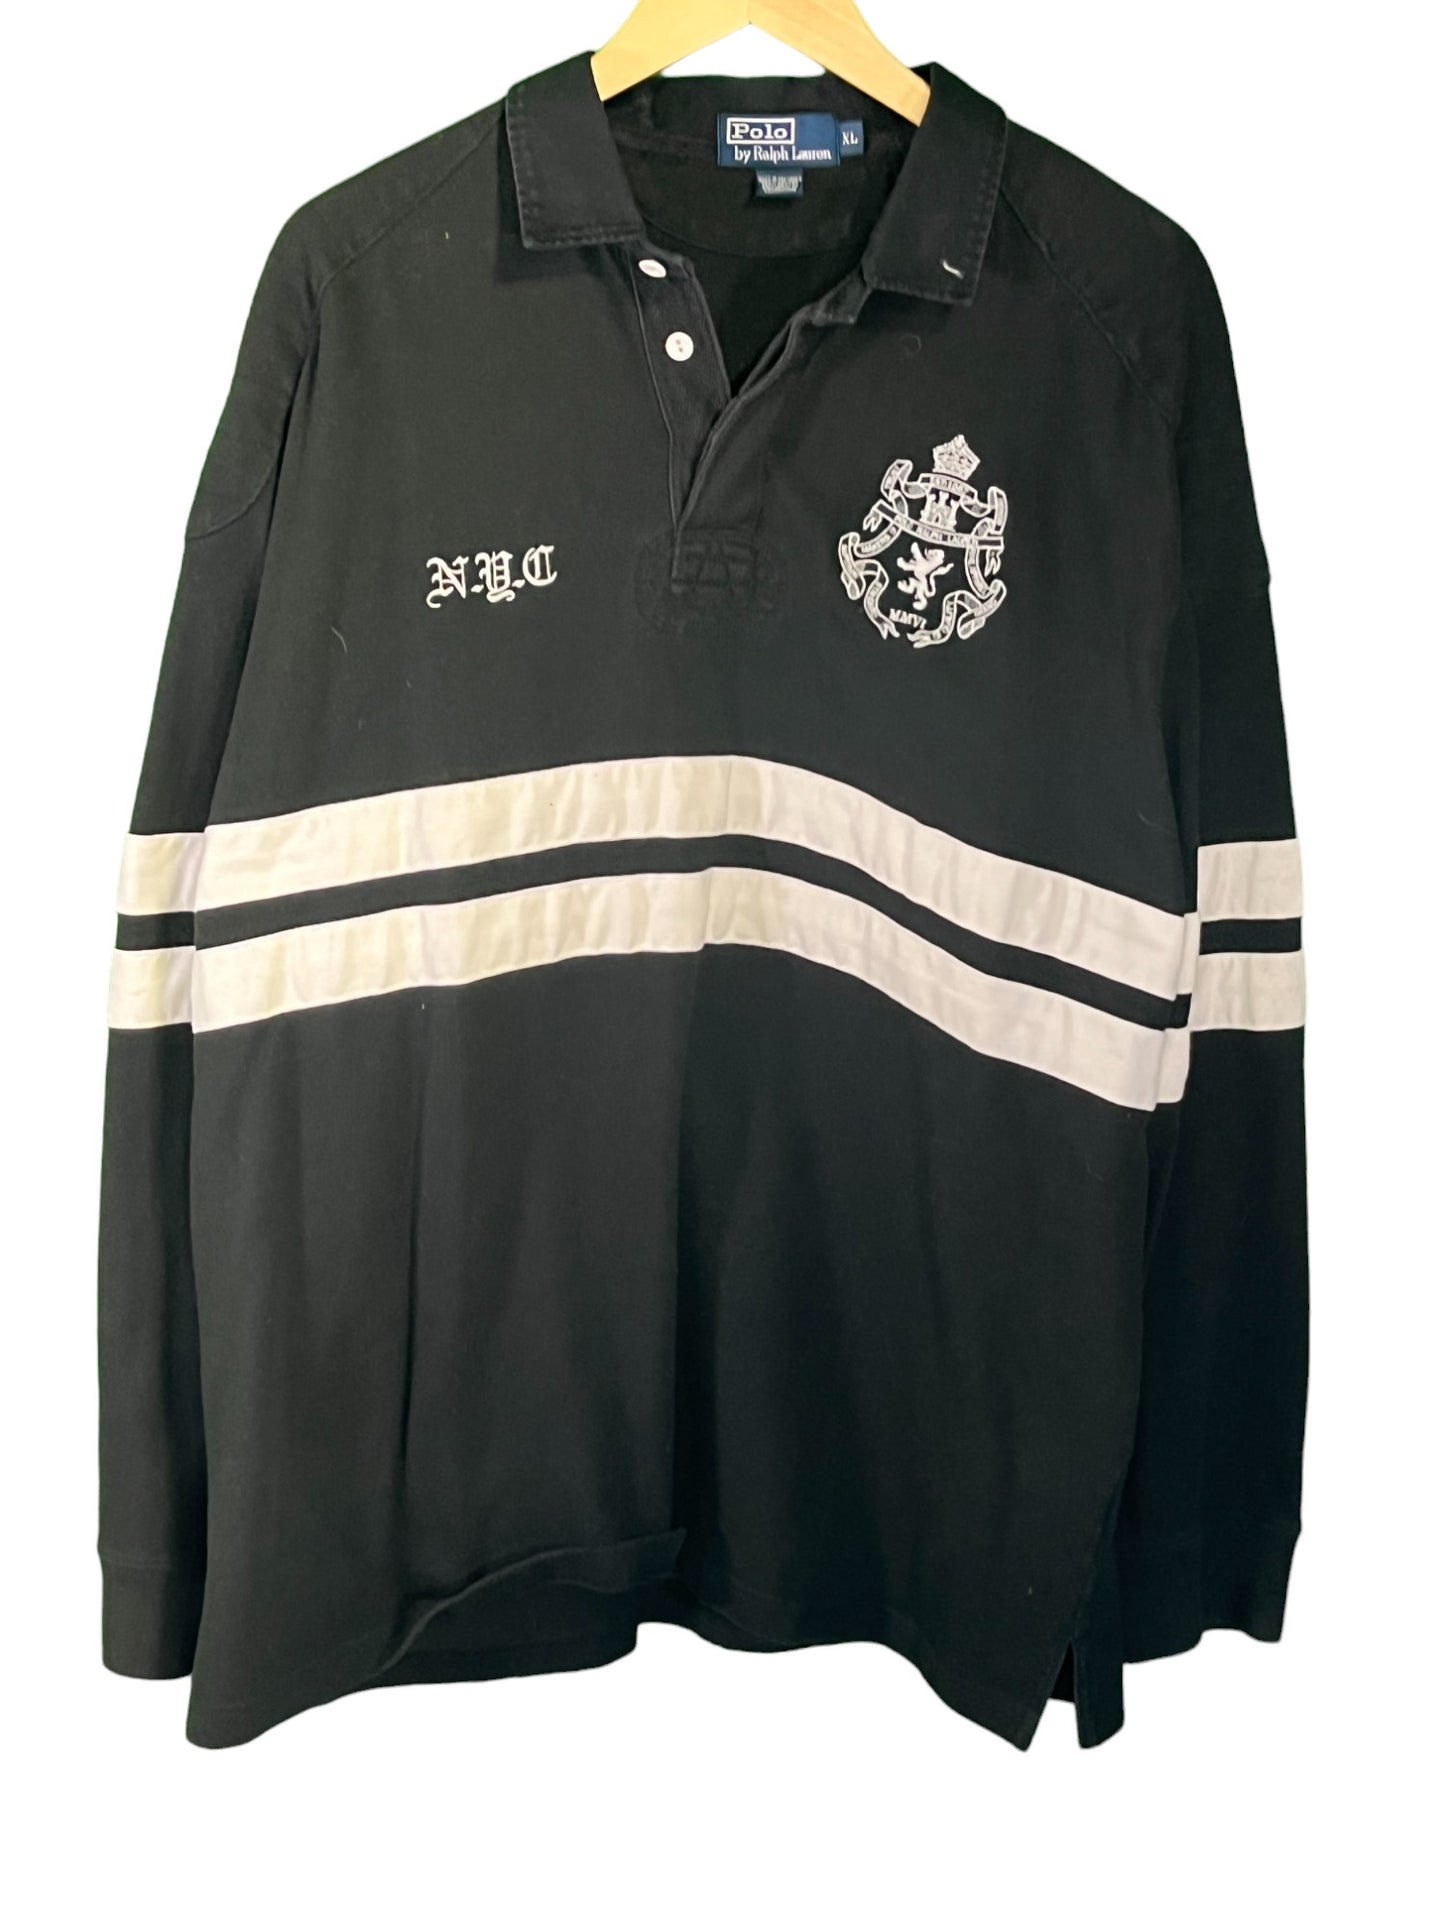 Vintage Polo Ralph Lauren Black Striped NYC Long Sleeve Rugby Shirt Size XL